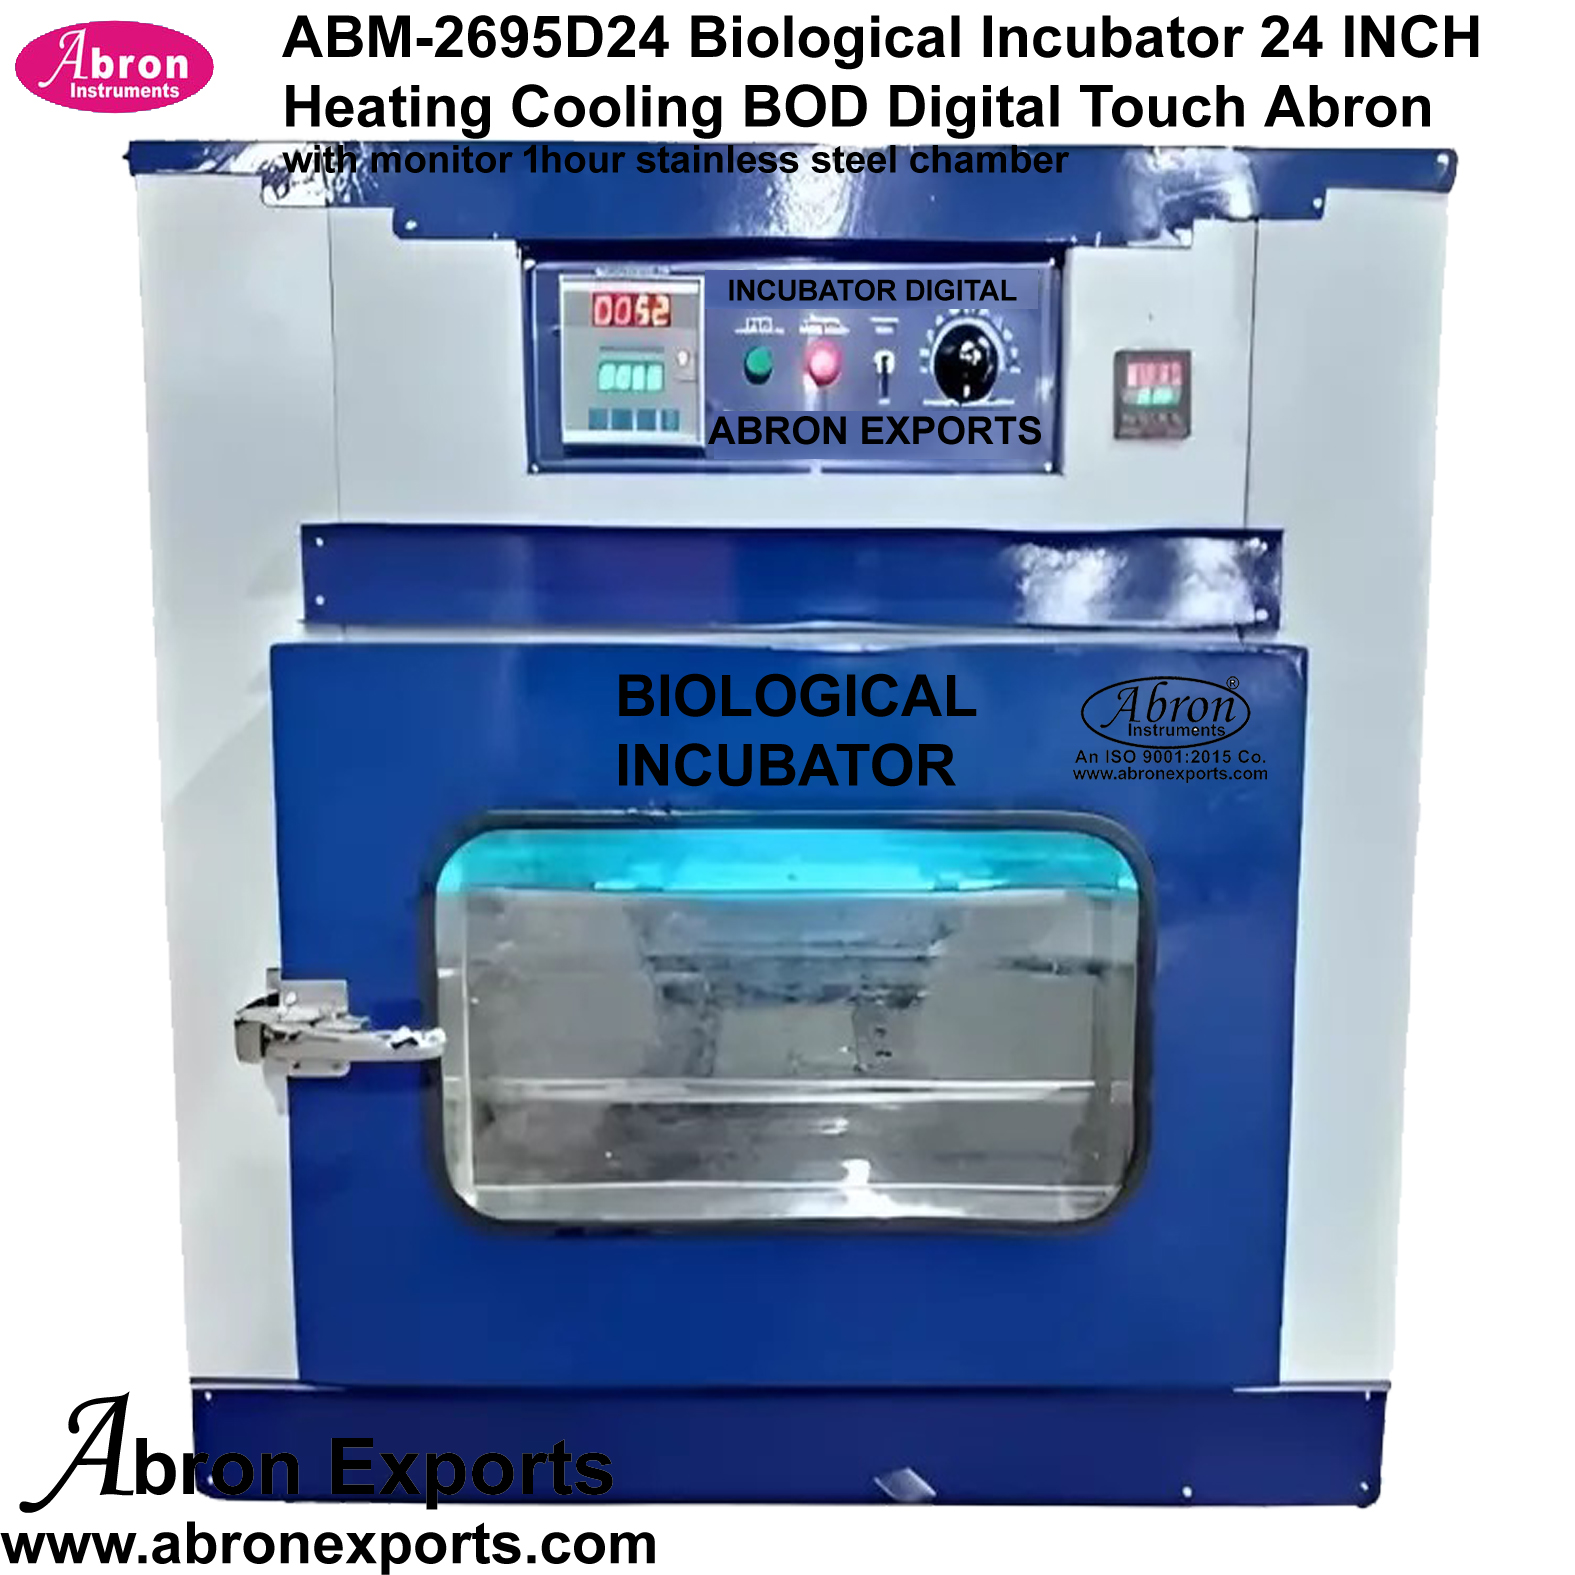 Biological Incubator for Steam sterilizer 1 hr monitoringss chamber 36inch 90cm digital with timer Abron ABM-2695D36S 